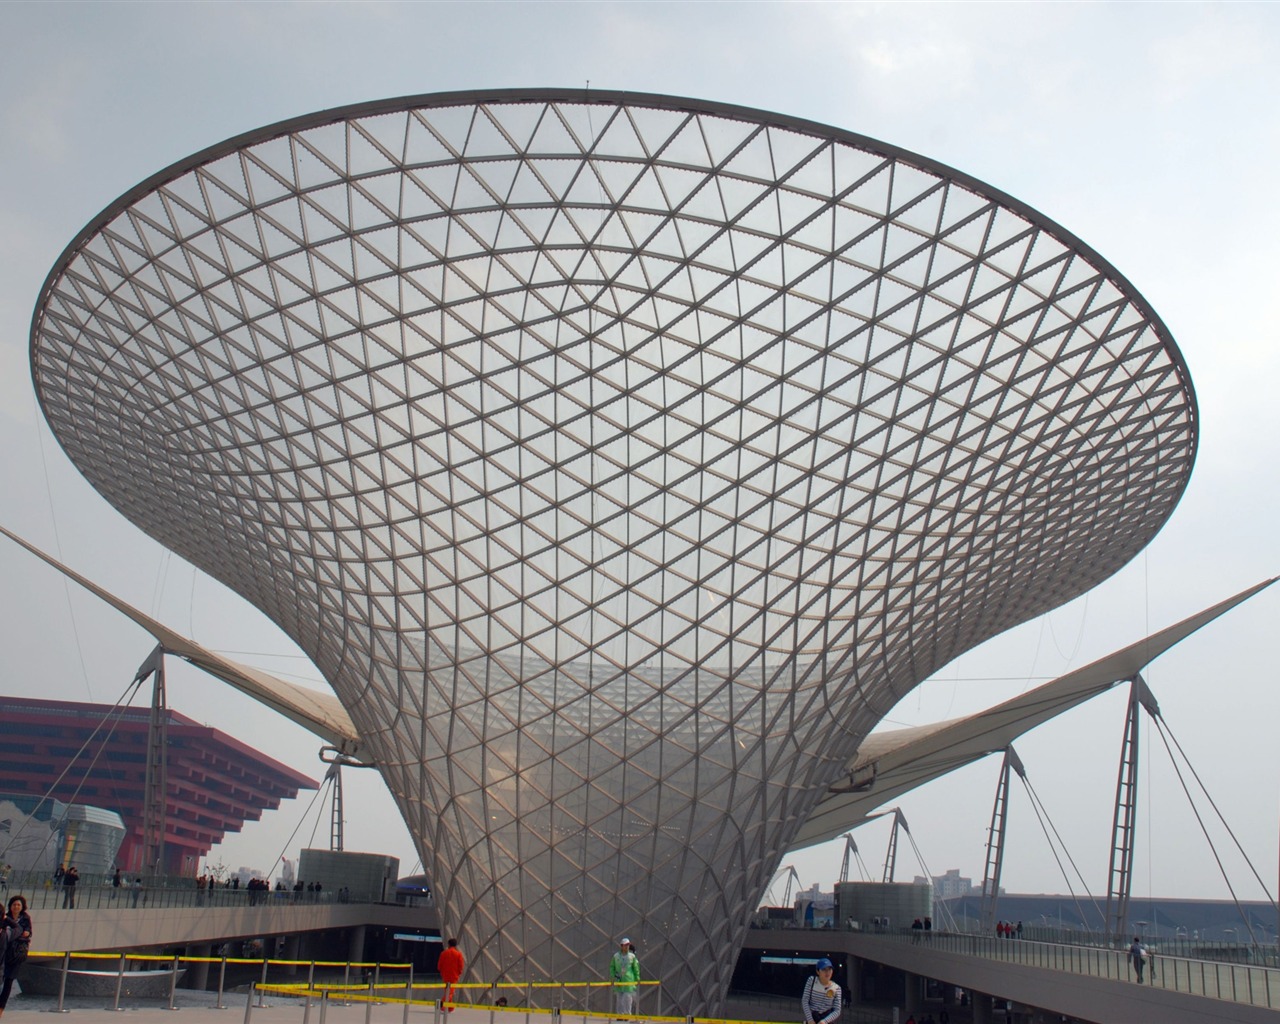 Commissioning of the 2010 Shanghai World Expo (studious works) #19 - 1280x1024